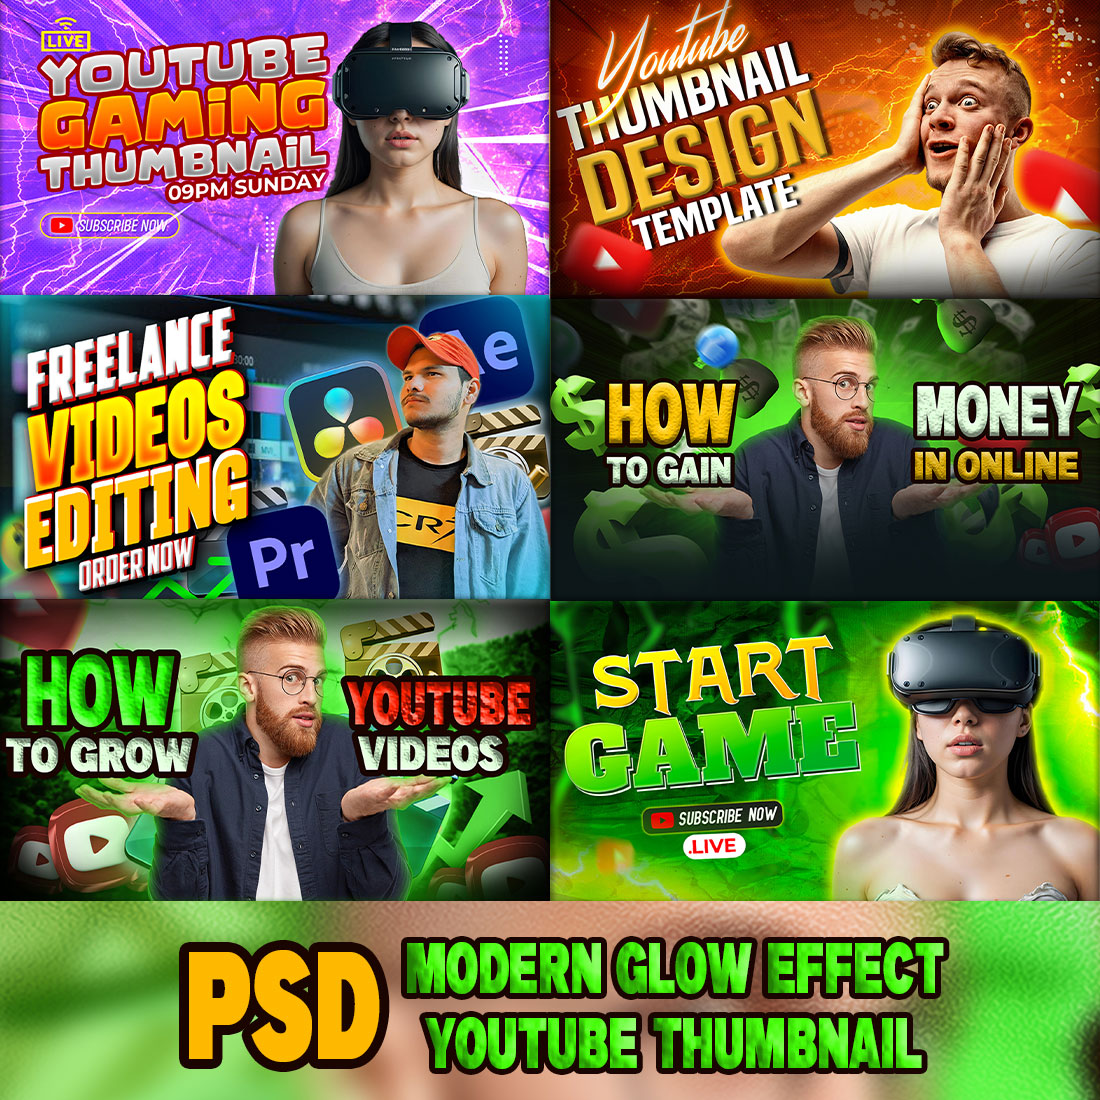 PSD Modern glow effect youtube video thumbnail template design fully editable cover image.